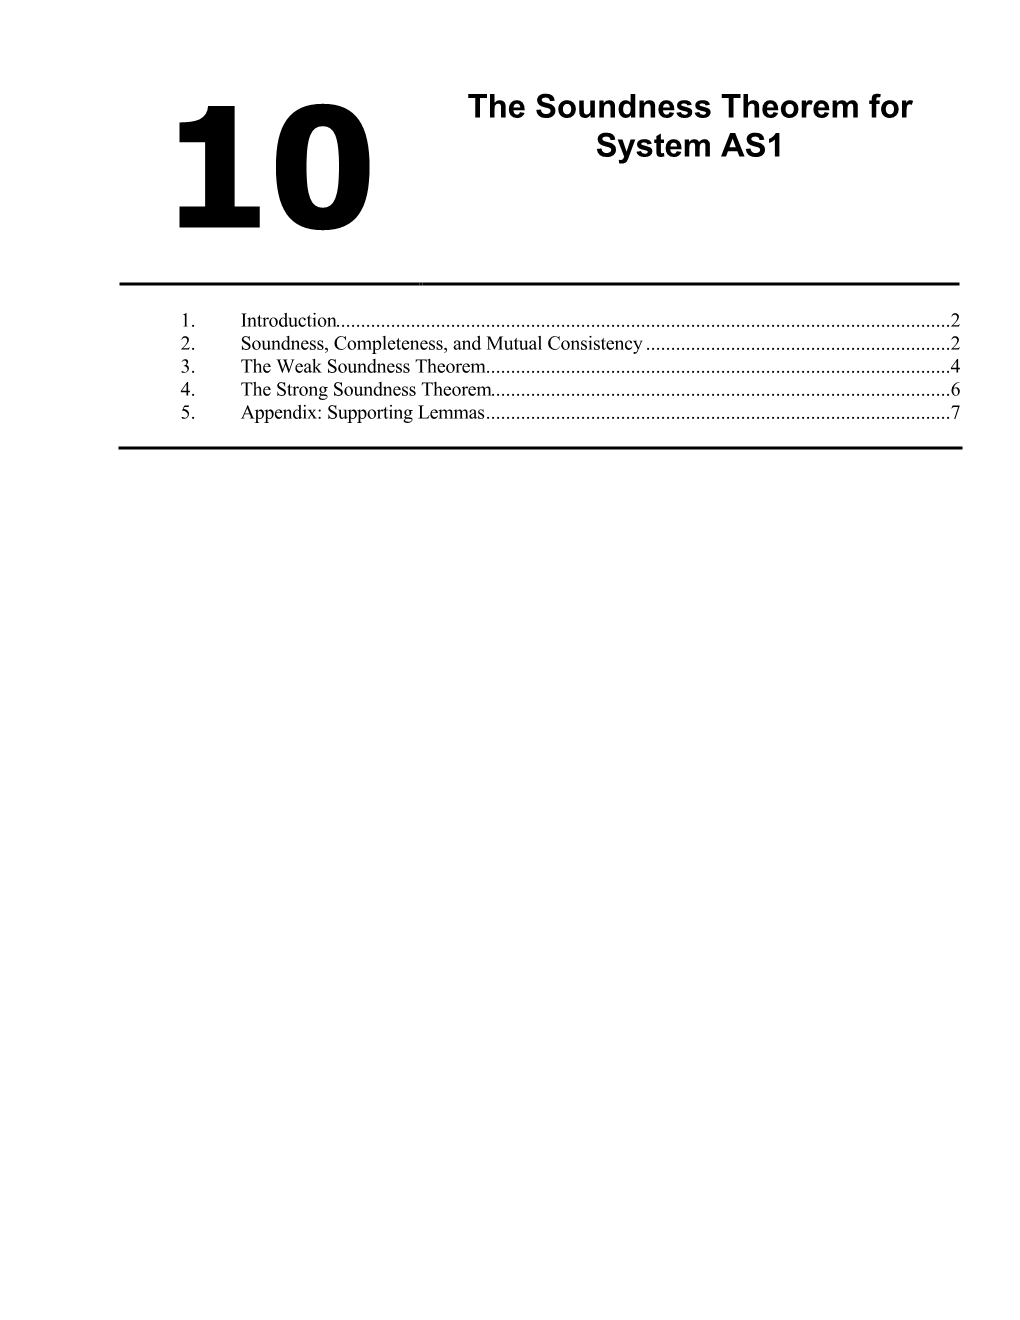 Chapter 10: the Soundness Theorem for System